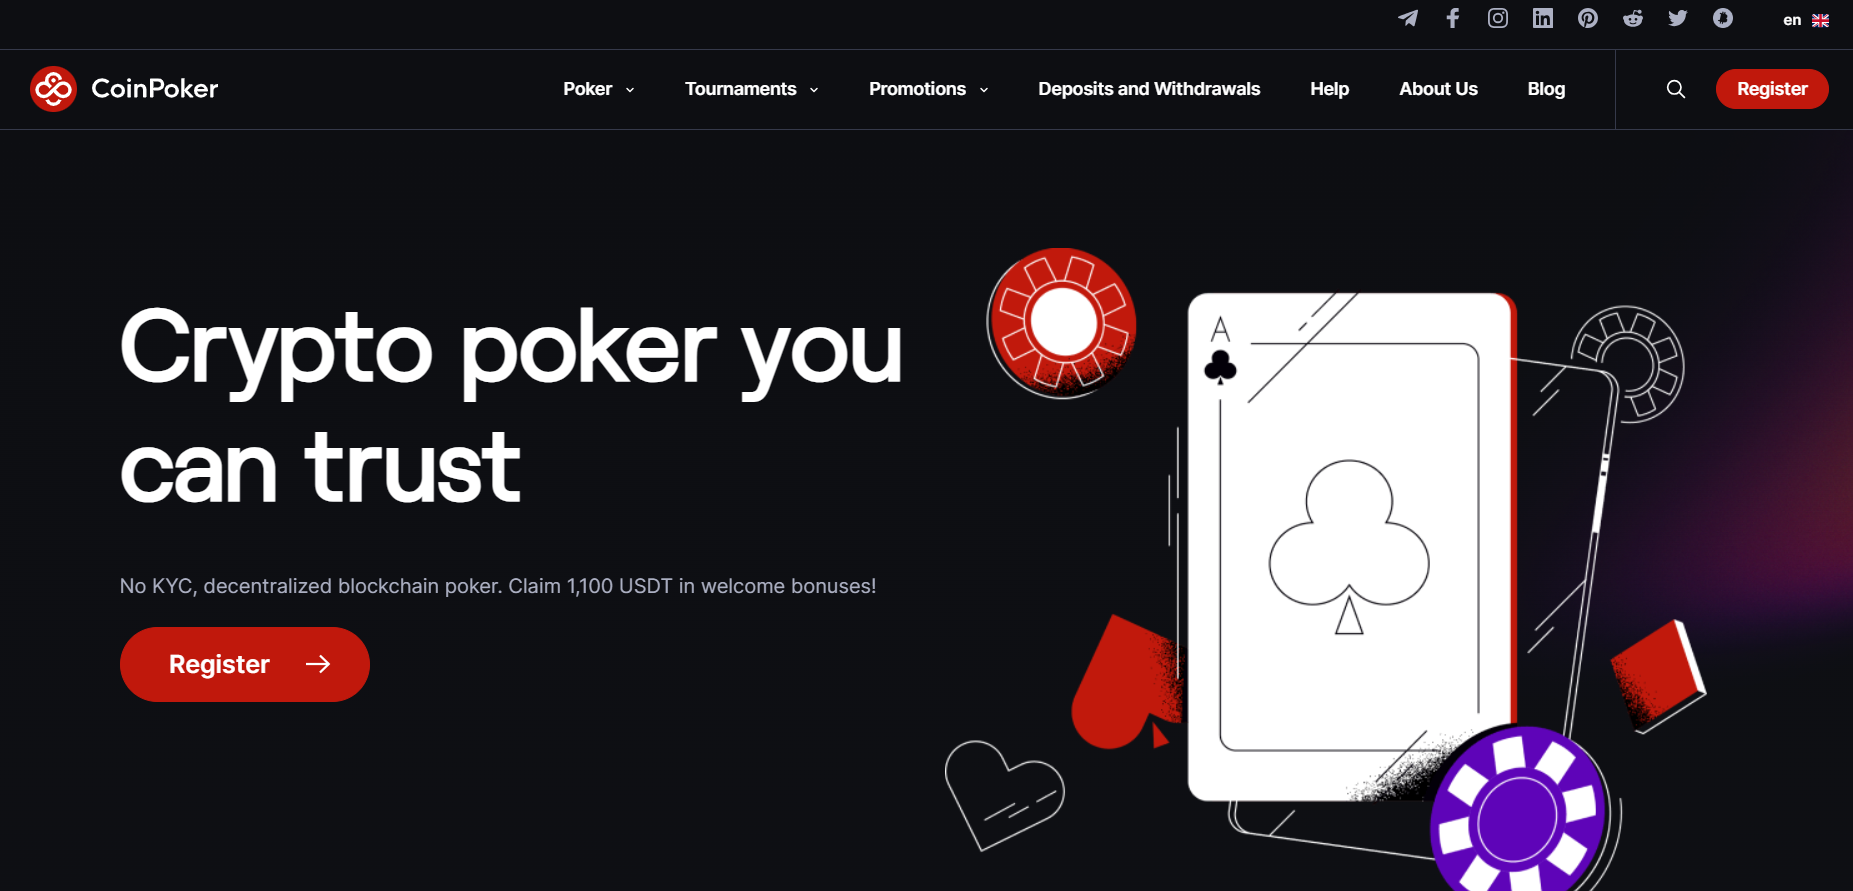 Step 1 - Visit the CoinPoker Poker Homepage